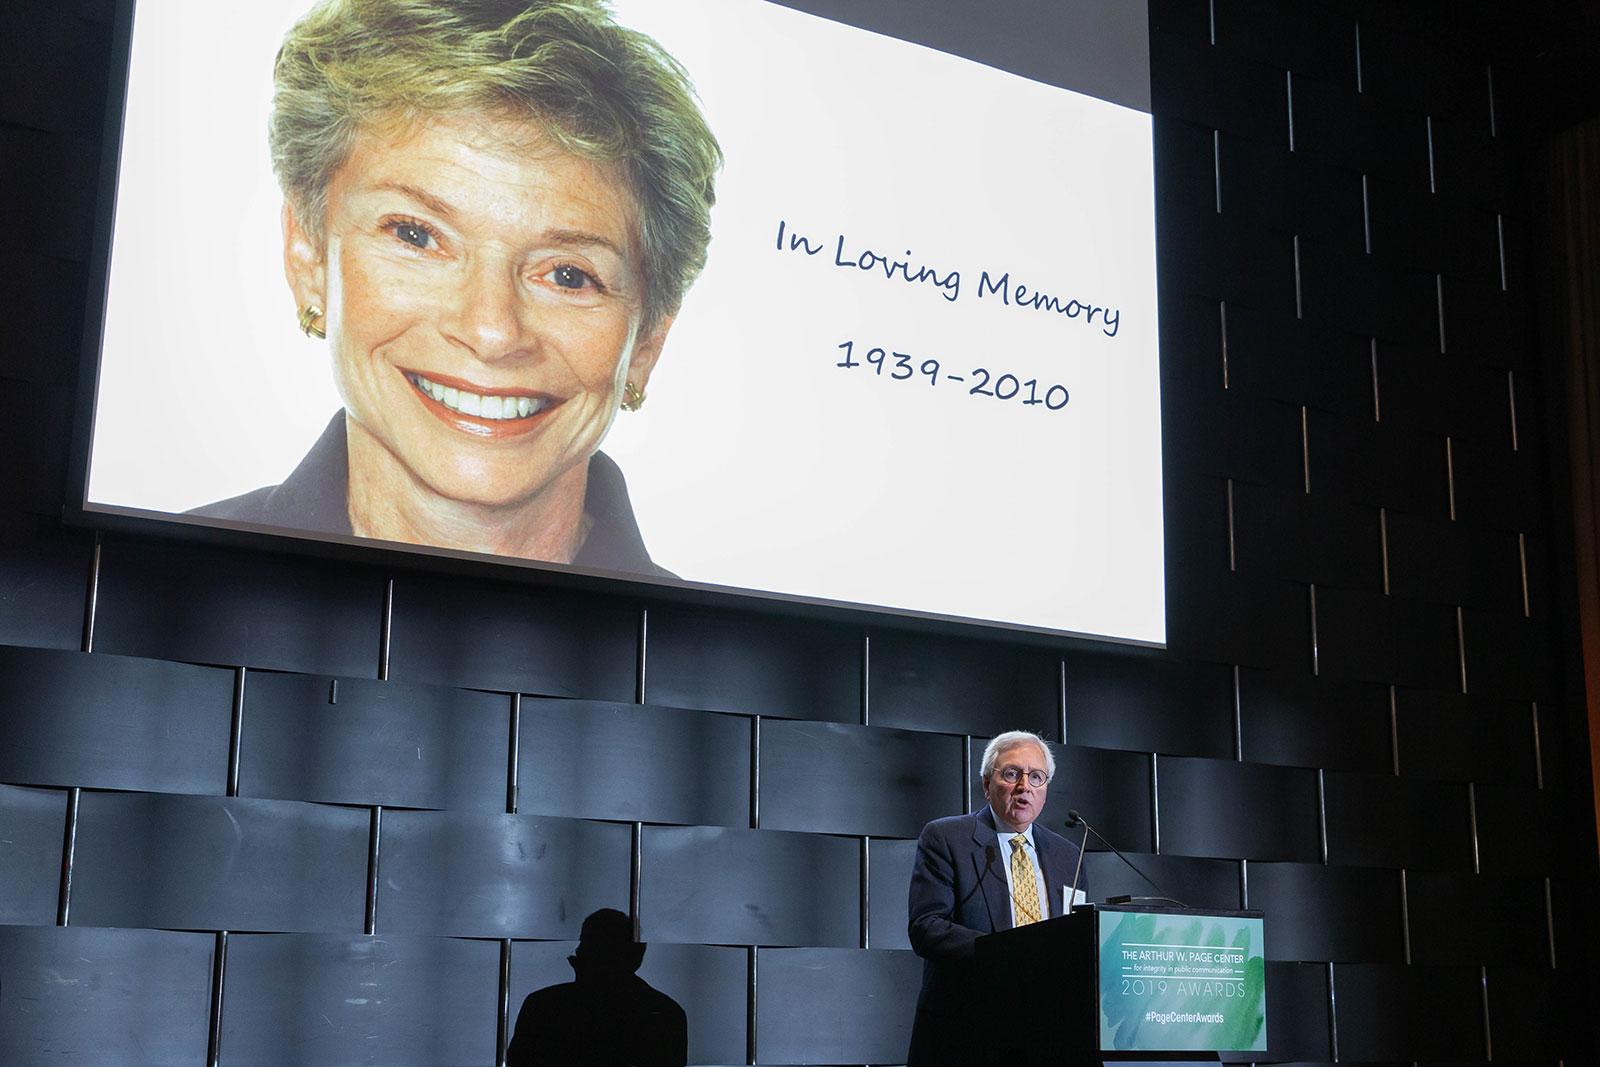 Former honoree Dick Martin shares a touching tribute to 2019 posthumous honoree Marilyn Laurie.